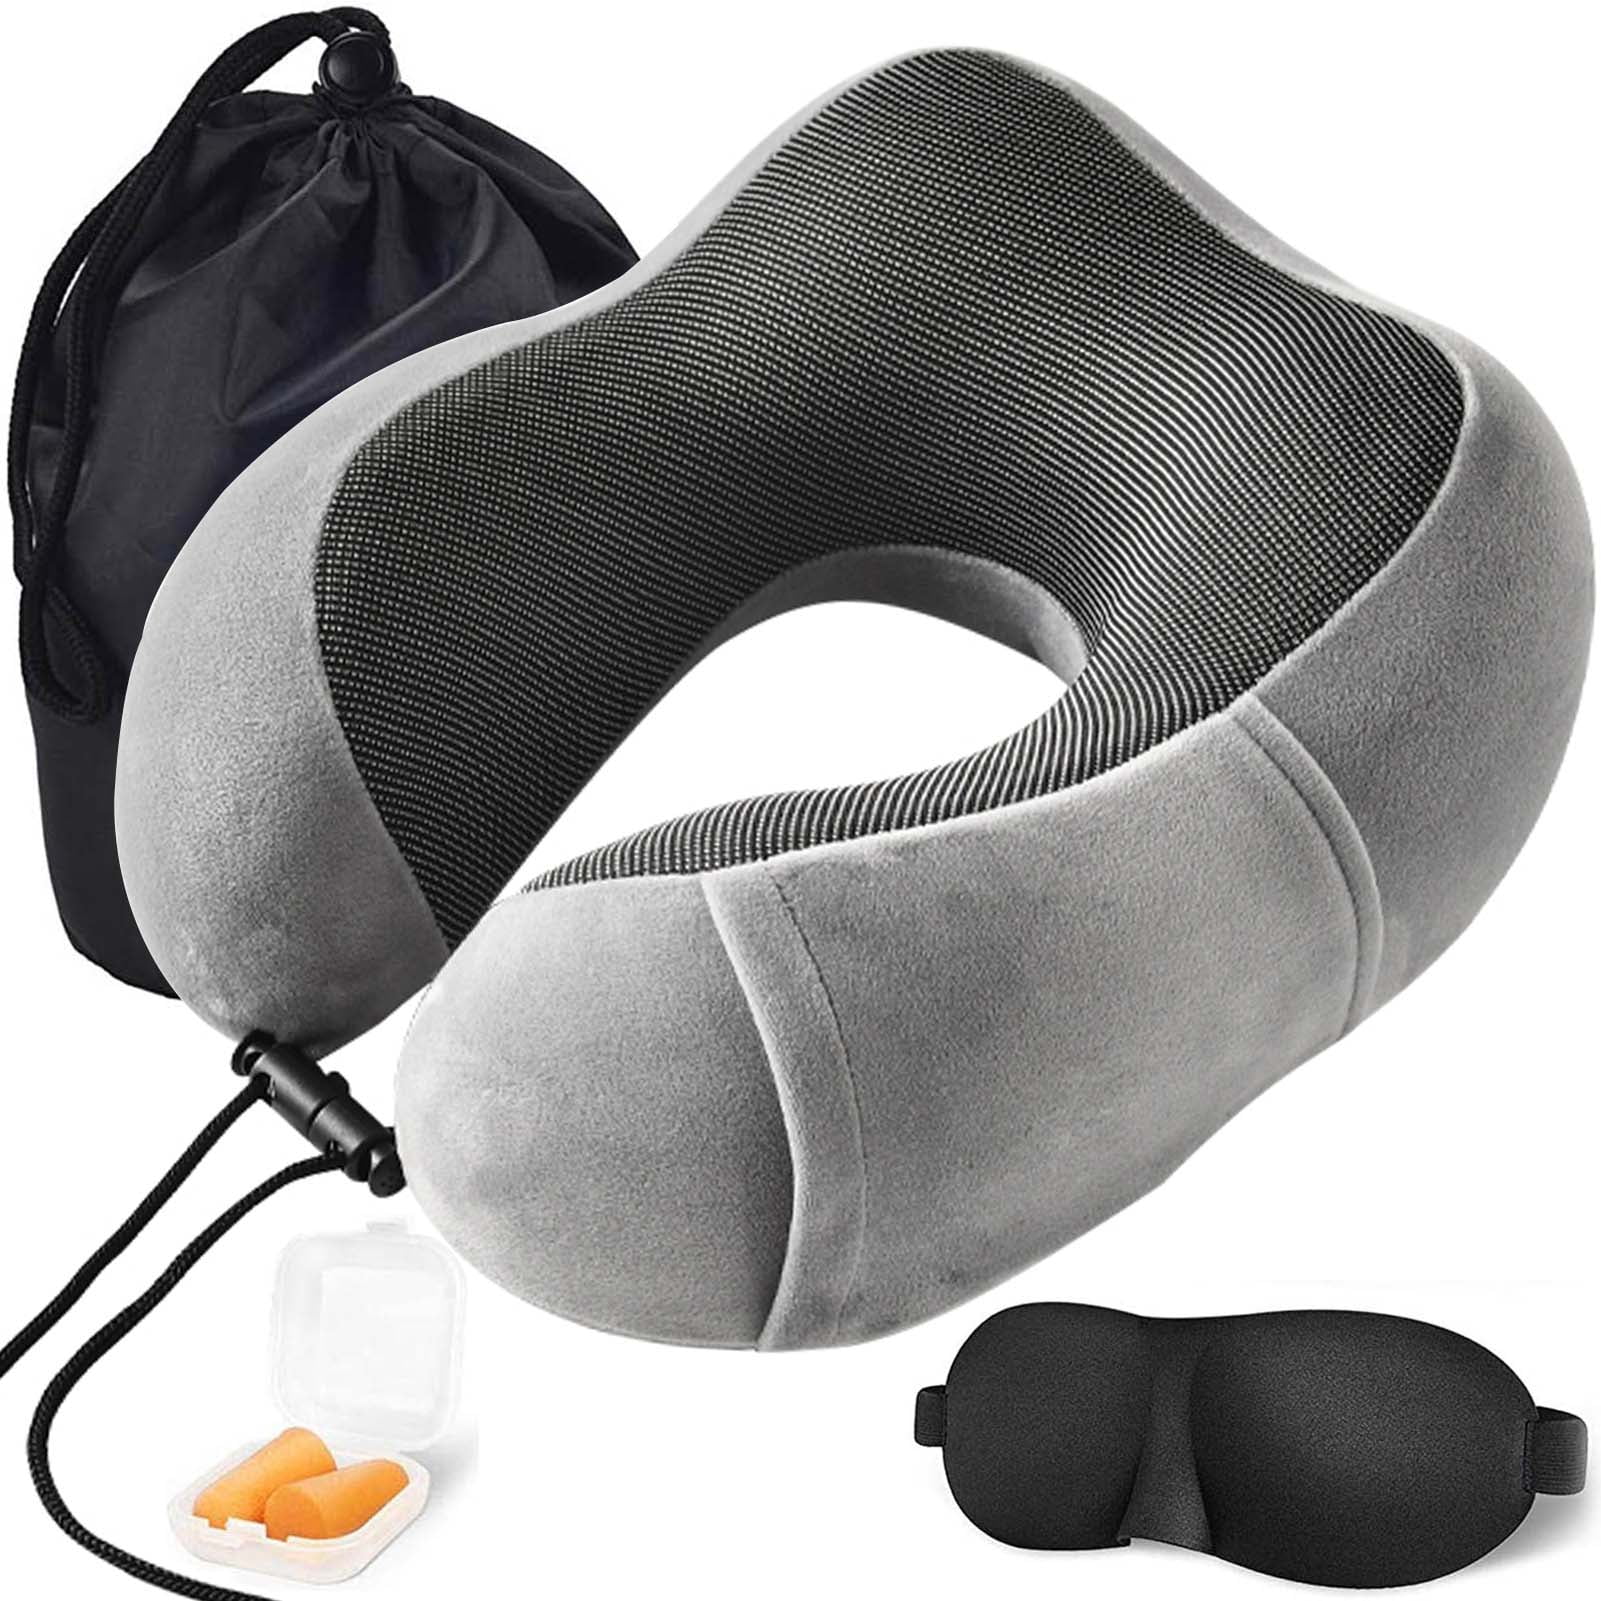 Online Shopping for medical pillow, Shop for medical pillow